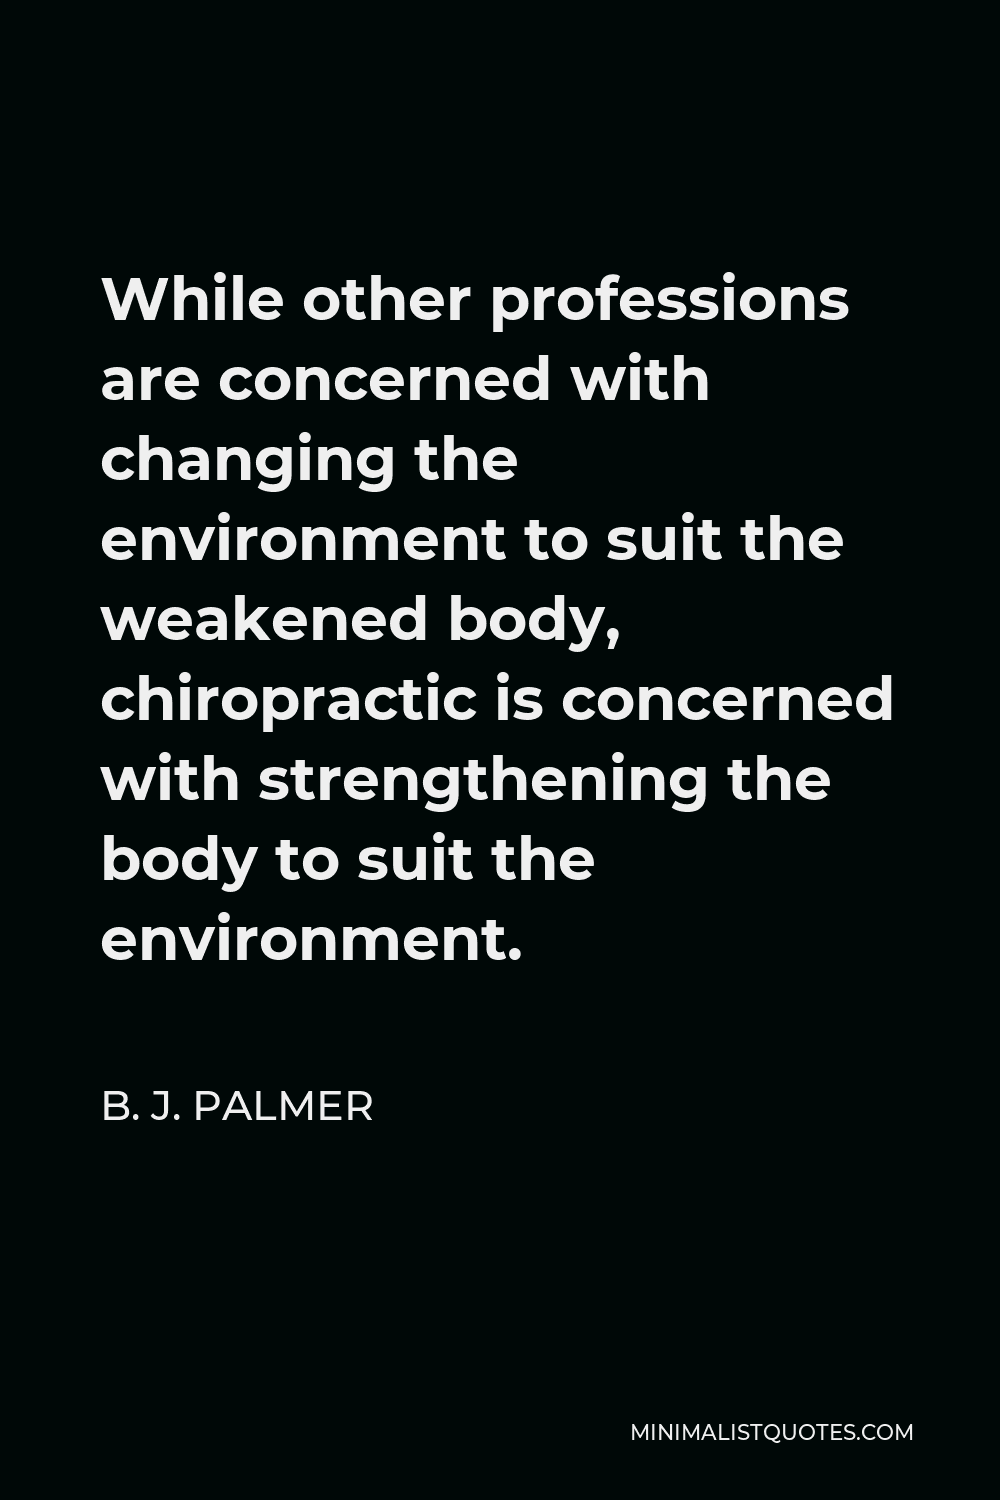 B. J. Palmer Quote - While other professions are concerned with changing the environment to suit the weakened body, chiropractic is concerned with strengthening the body to suit the environment.